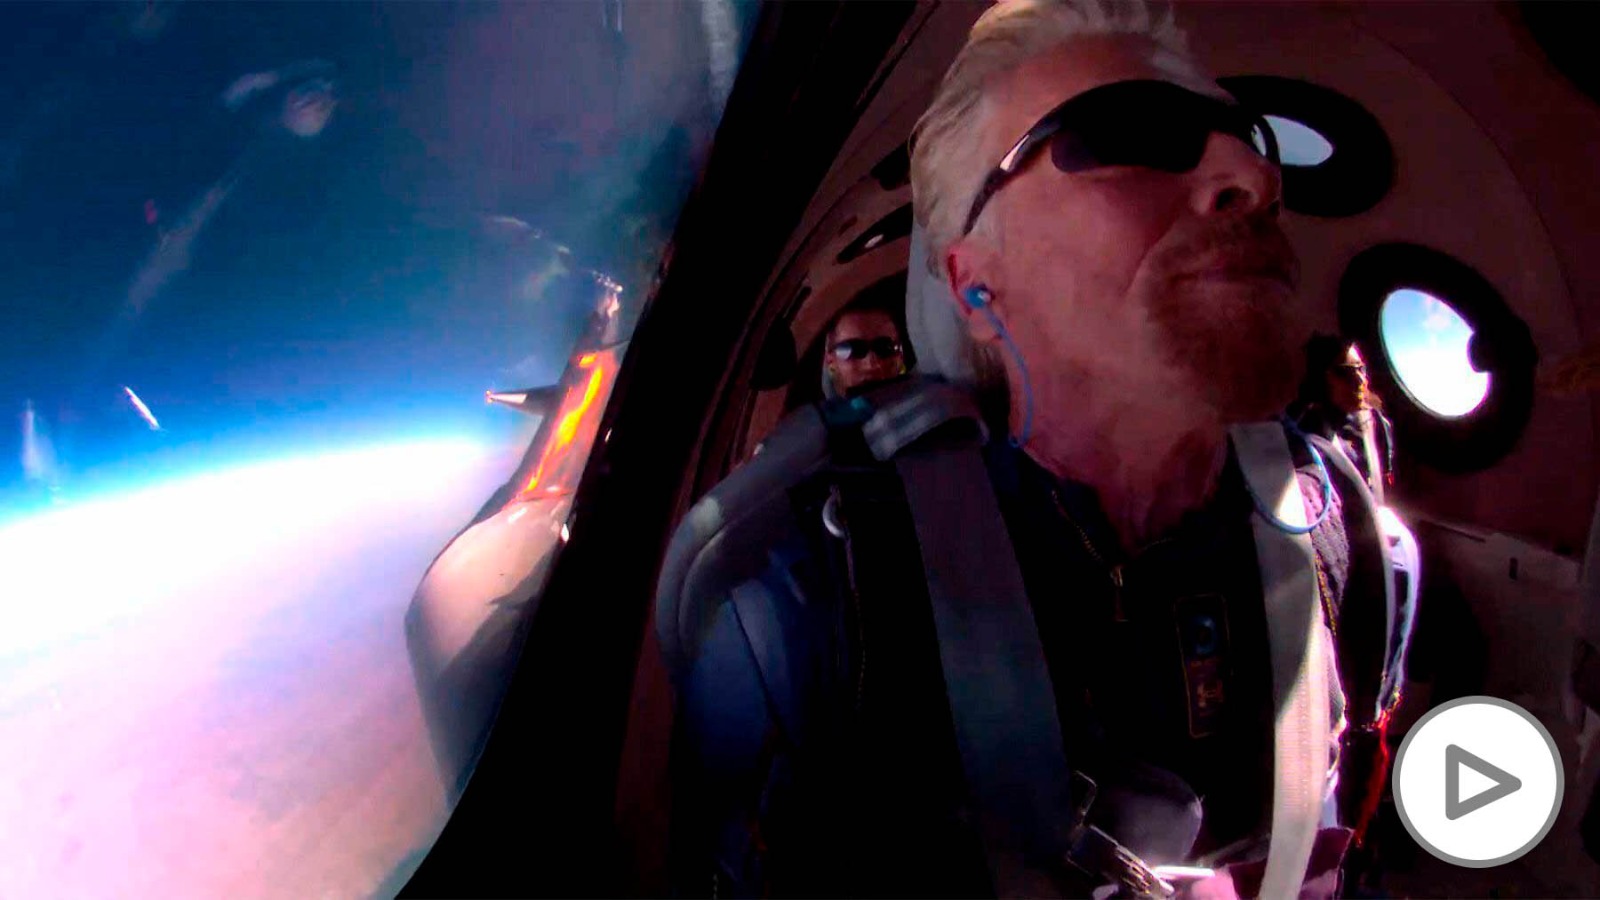 Richard Branson achieves his feat with Virgin Galactic and opens the era of space tourism